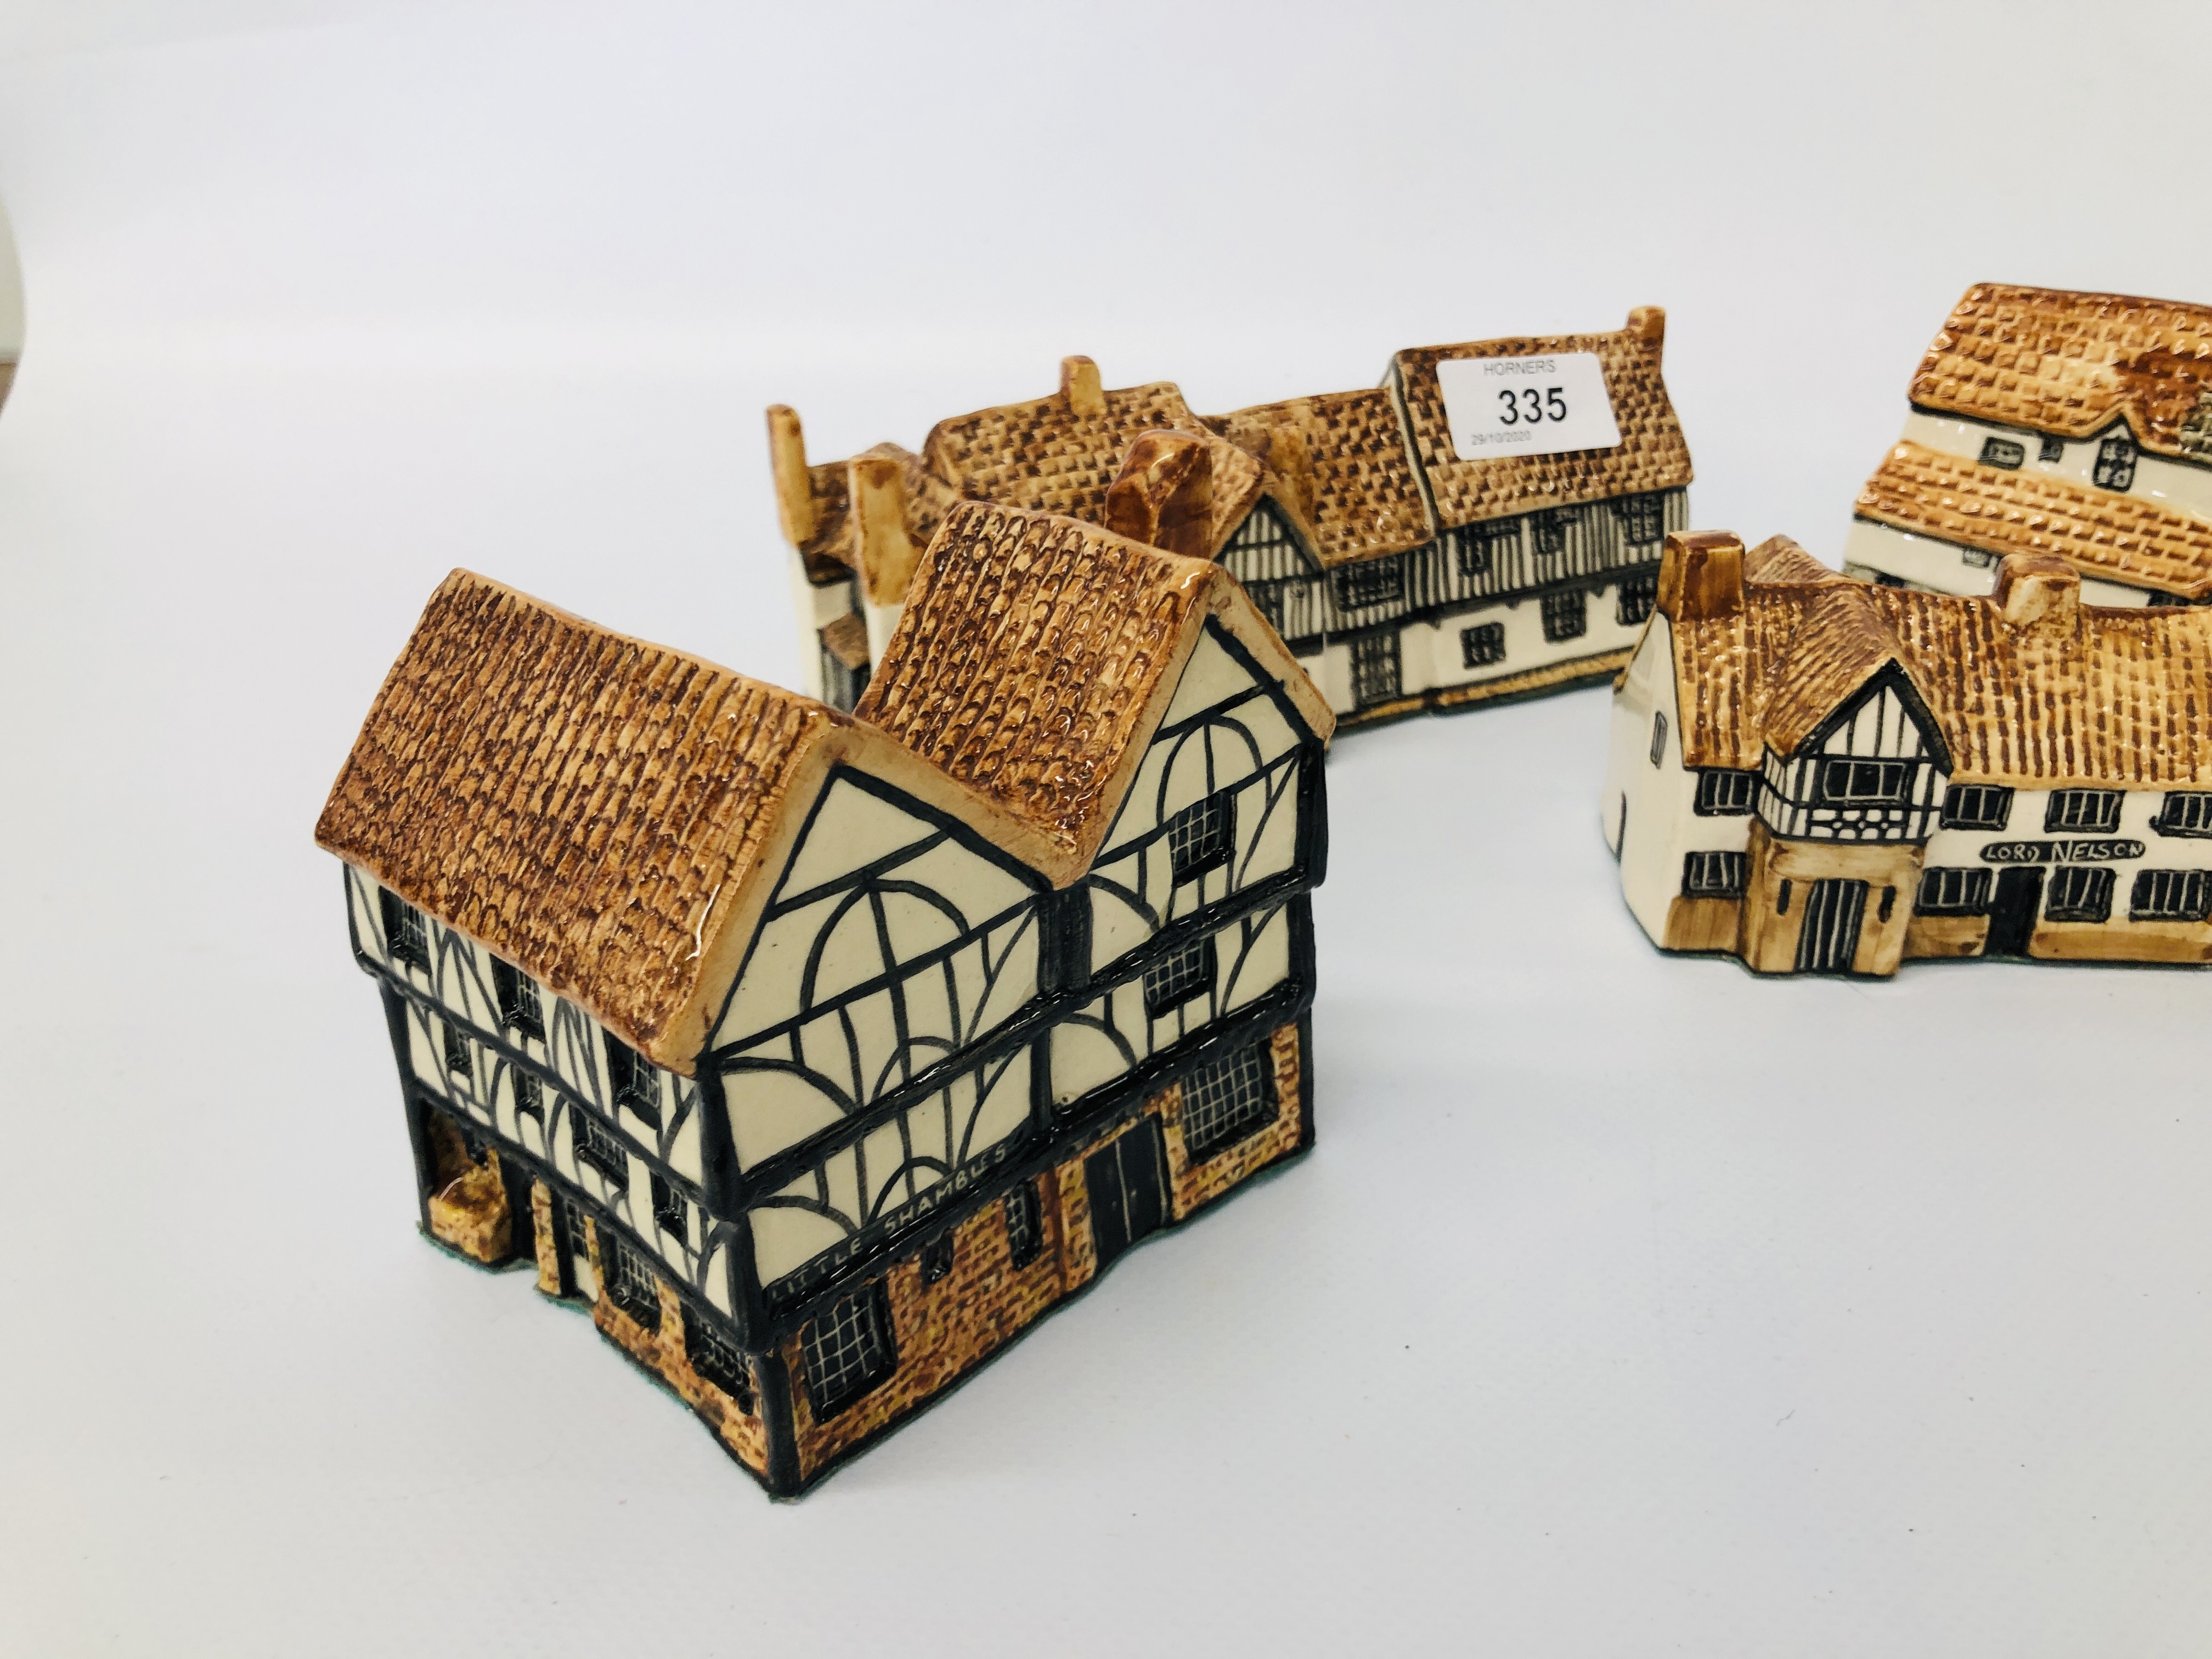 COLLECTION OF 7 TEY POTTERY HANDPAINTED MINIATURE MODEL COTTAGES - Image 4 of 5